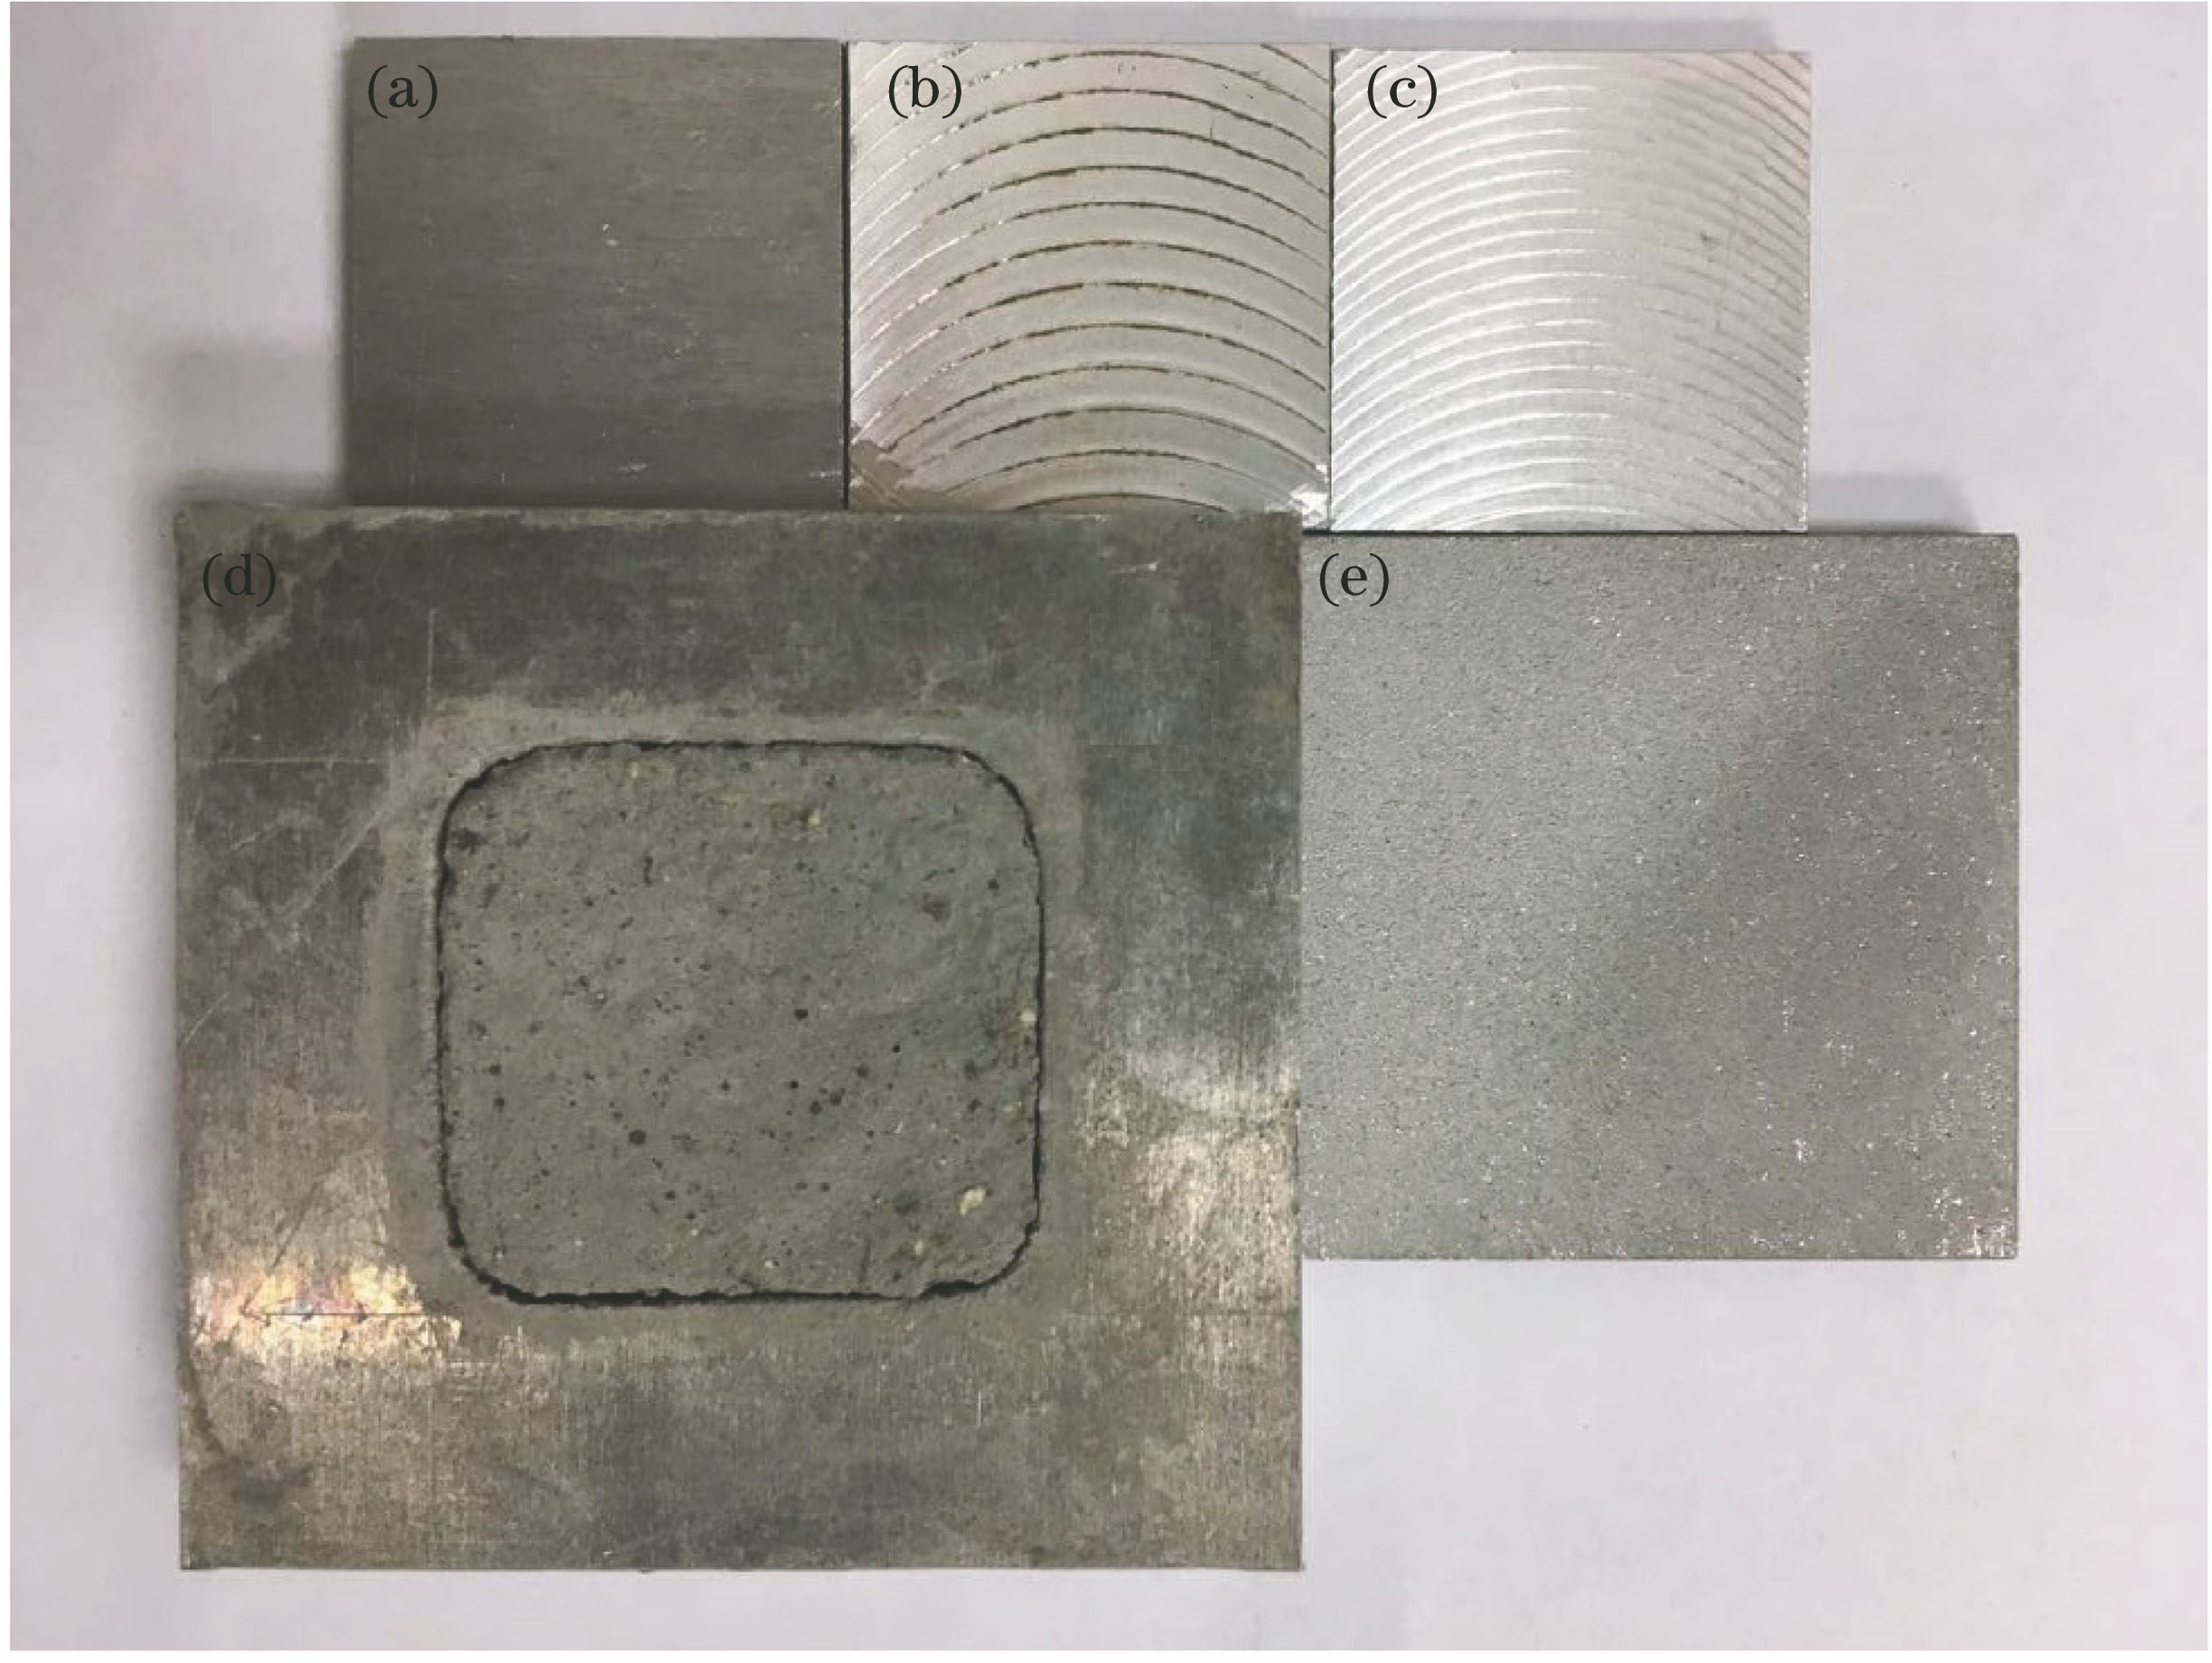 Test samples. (a) 2024 aluminum alloy, R=0.8 μm; (b) 2024 aluminum alloy, R=6.3 μm; (c) 2024 aluminum alloy, R=50 μm; (d) cement plate; (e) aluminum plate blasted with brown corundum